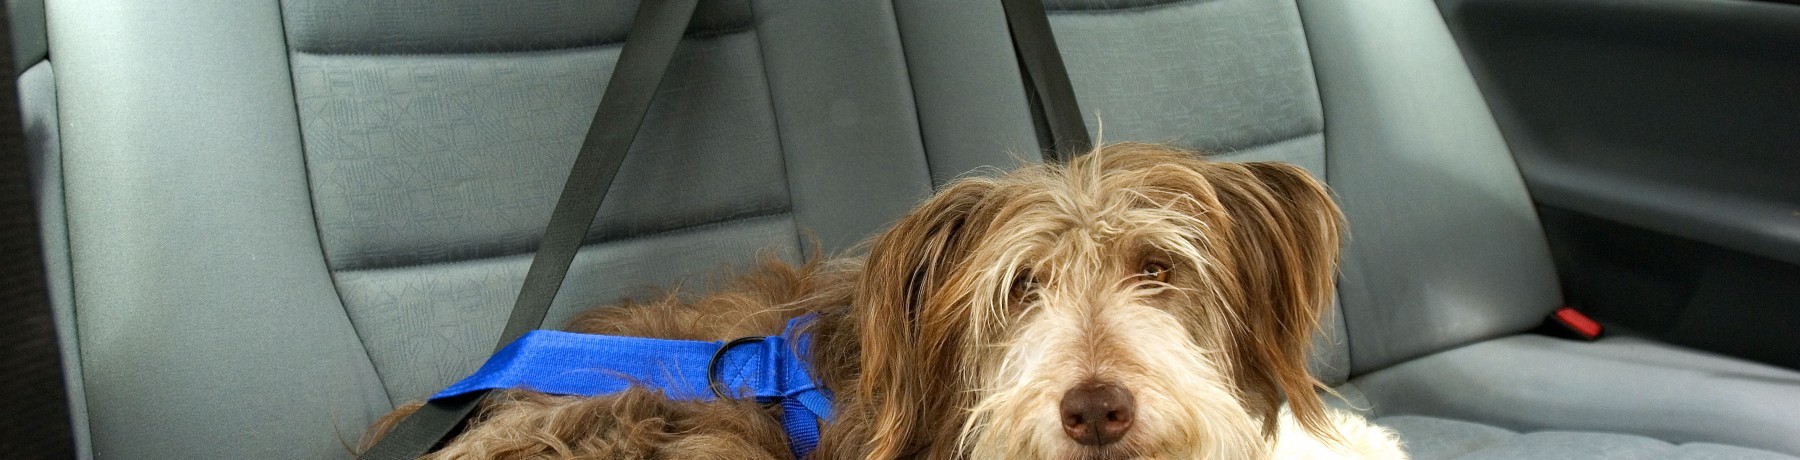 TRAVEL SAFETY WITH PETS FROM PDSA image